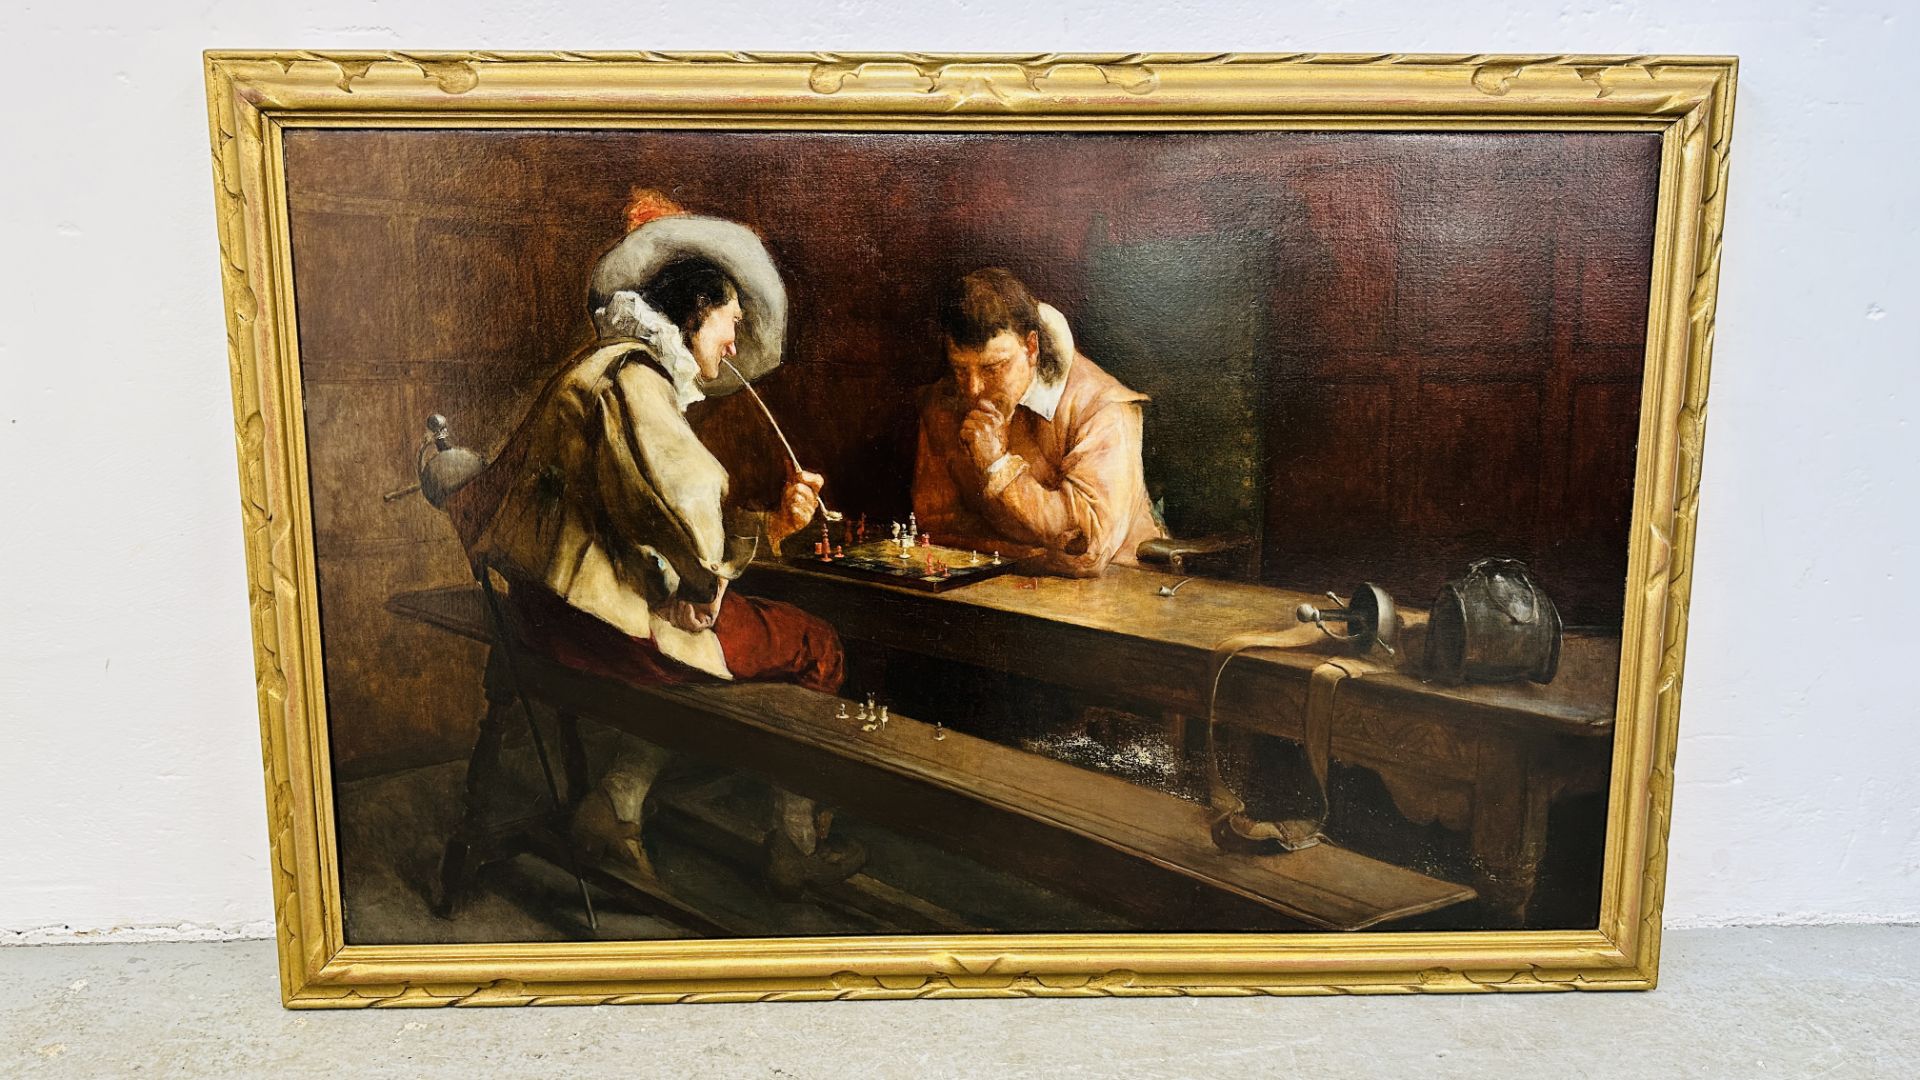 A REPRODUCTION OIL ON CANVAS OF DUTCH INTERIOR SCENE OF SEATED FIGURES PLAYING CHESS 65 X 100CM.